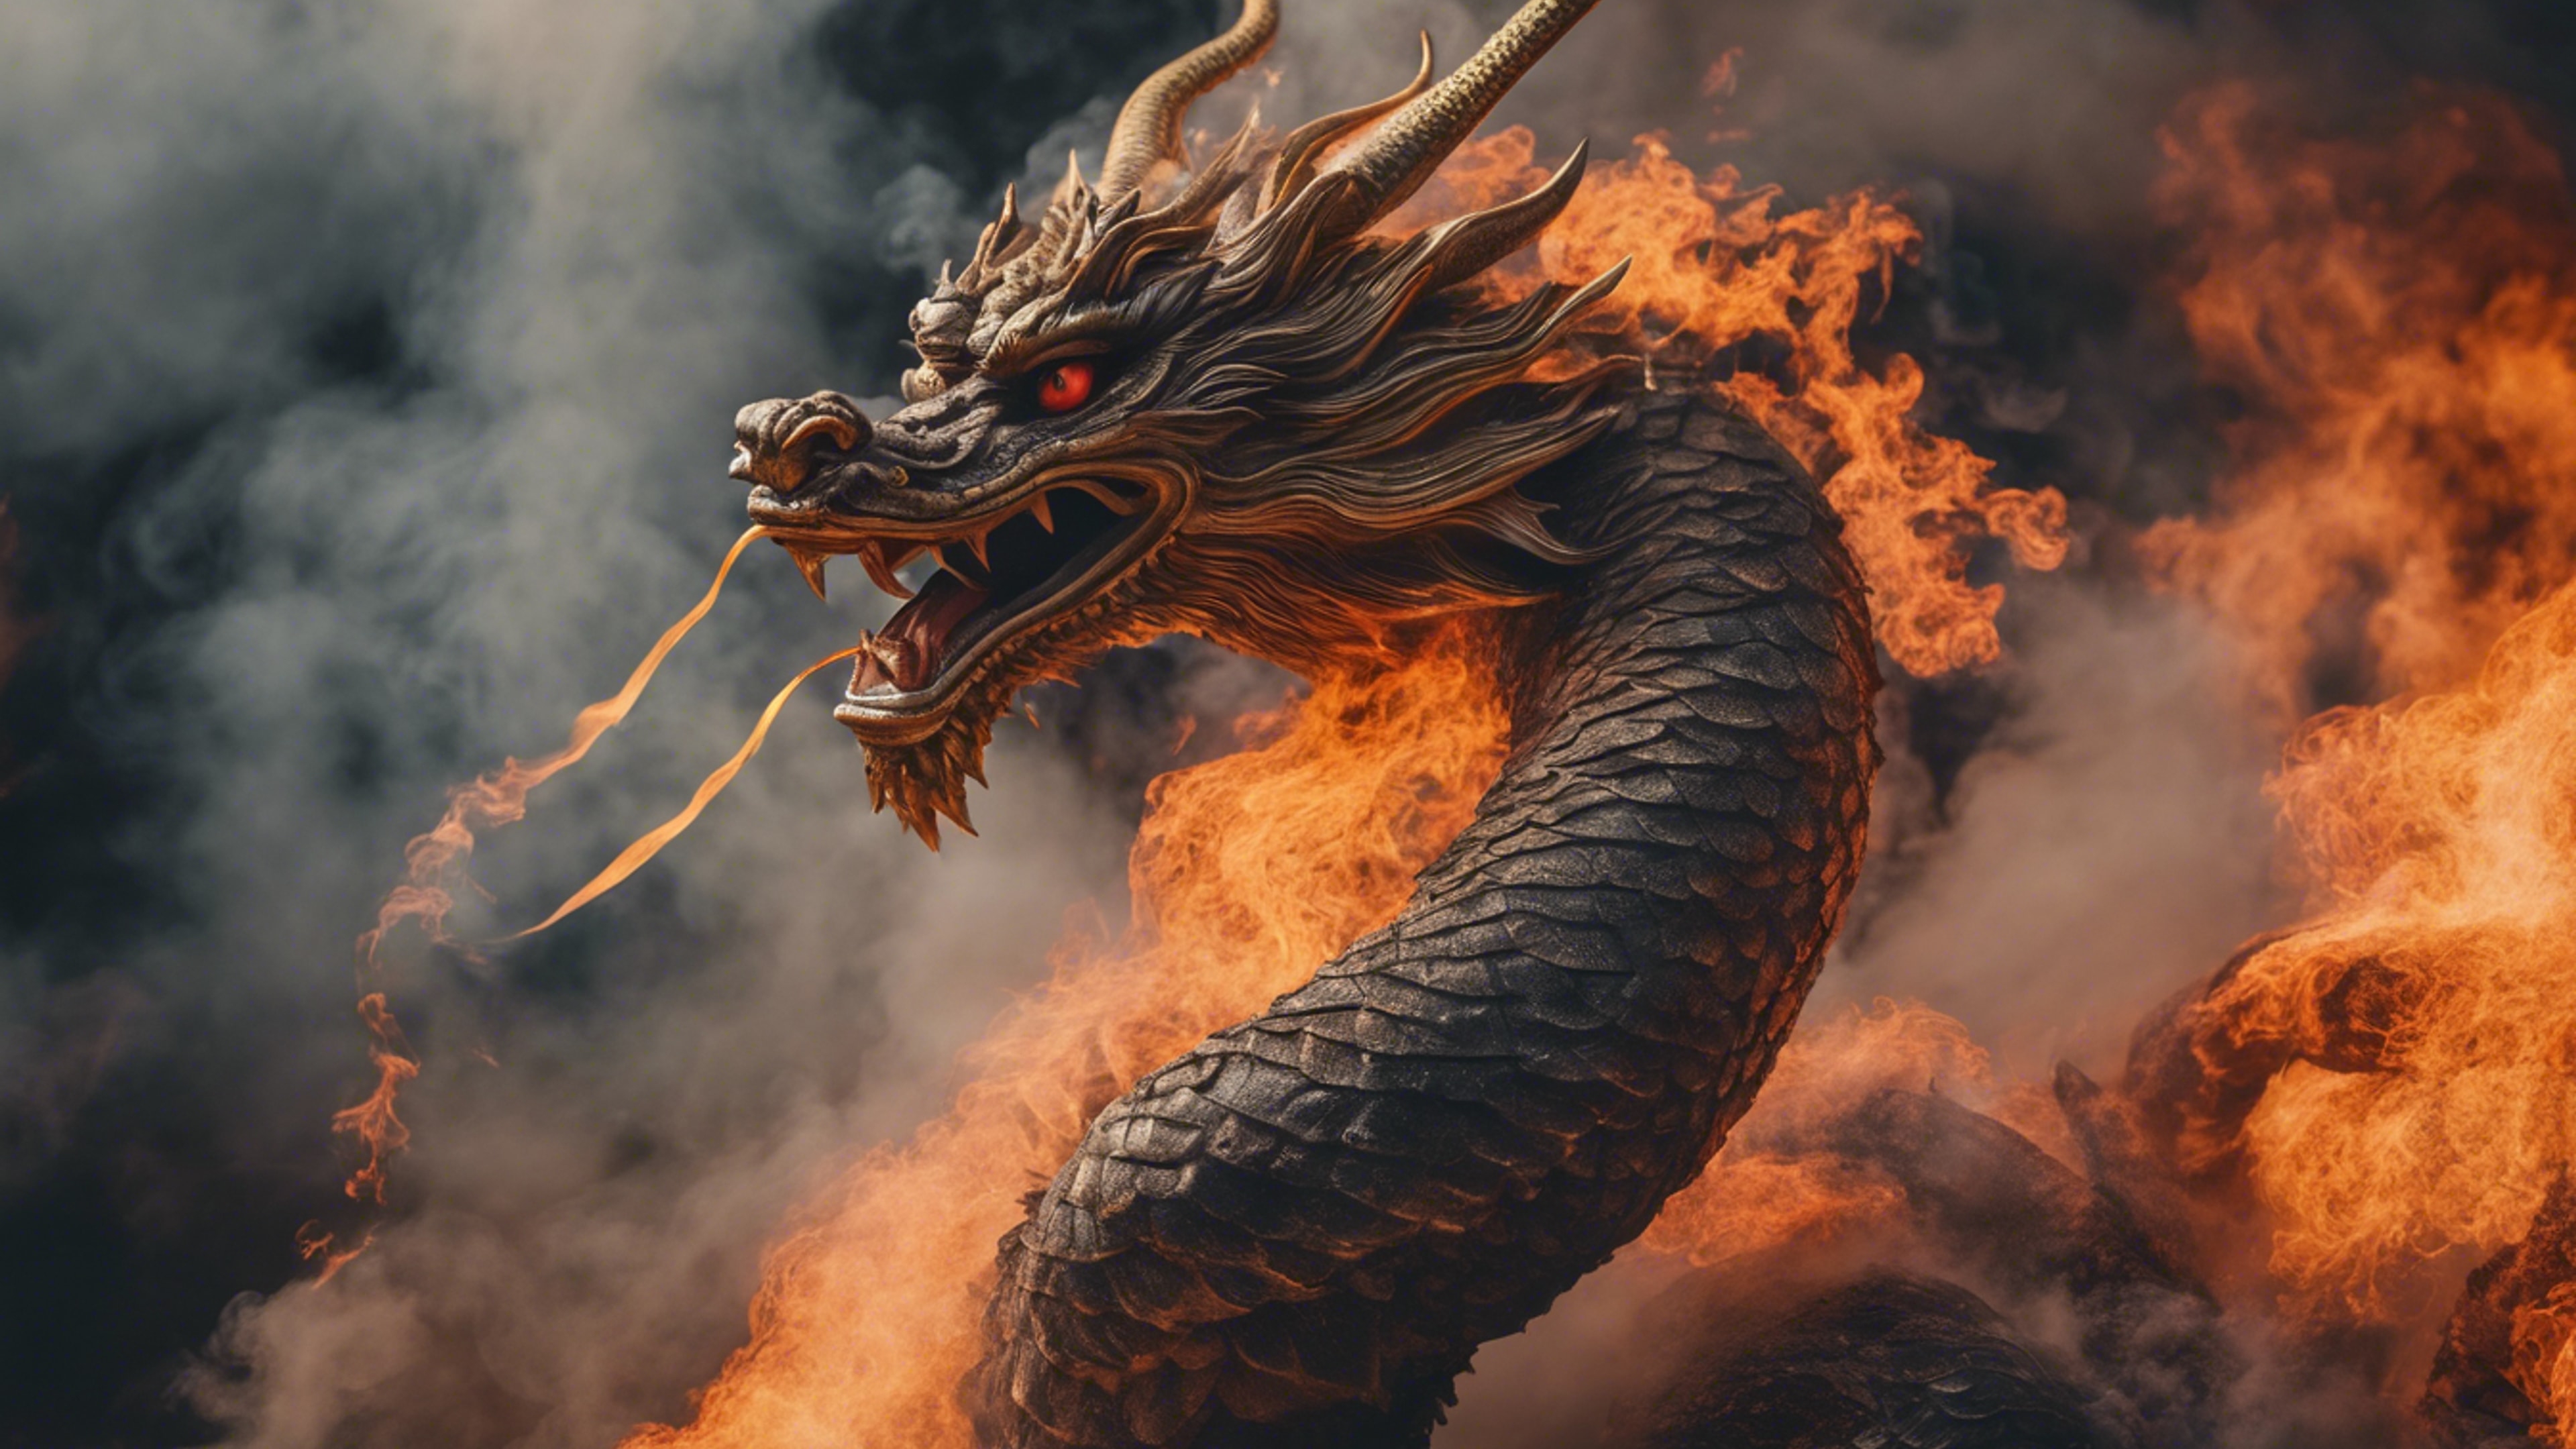 Japanese dragon enveloped in smoke and fire, as if from a volcano.壁紙[7fbdd61e23fc4aeb8194]